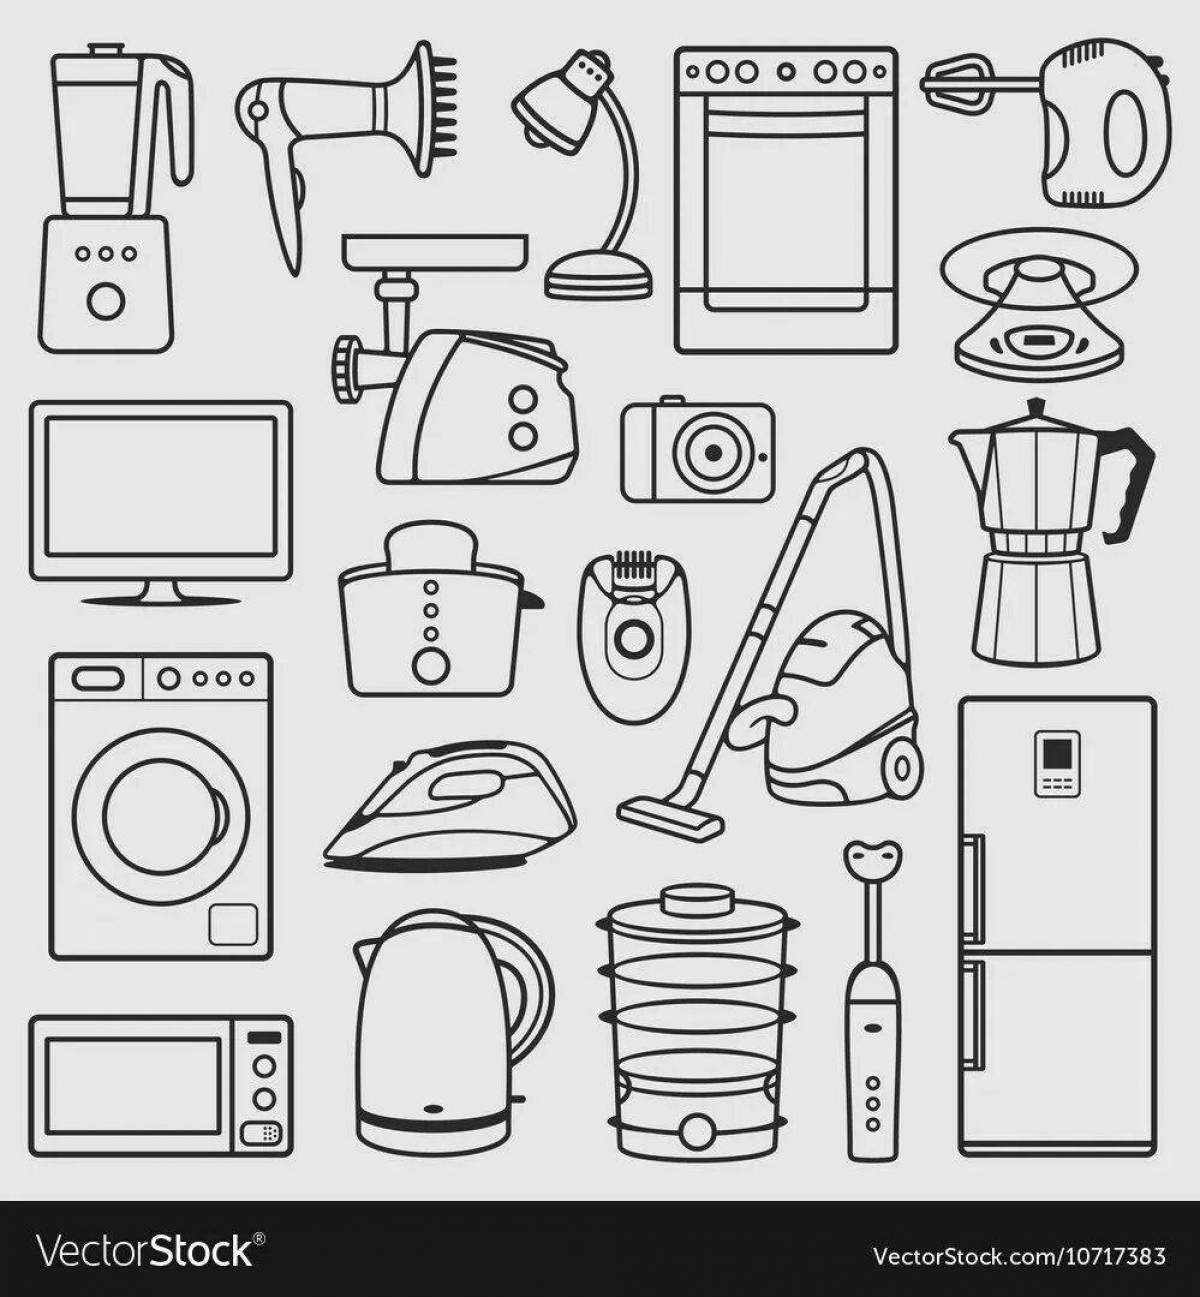 Electrical appliances in senior group #7